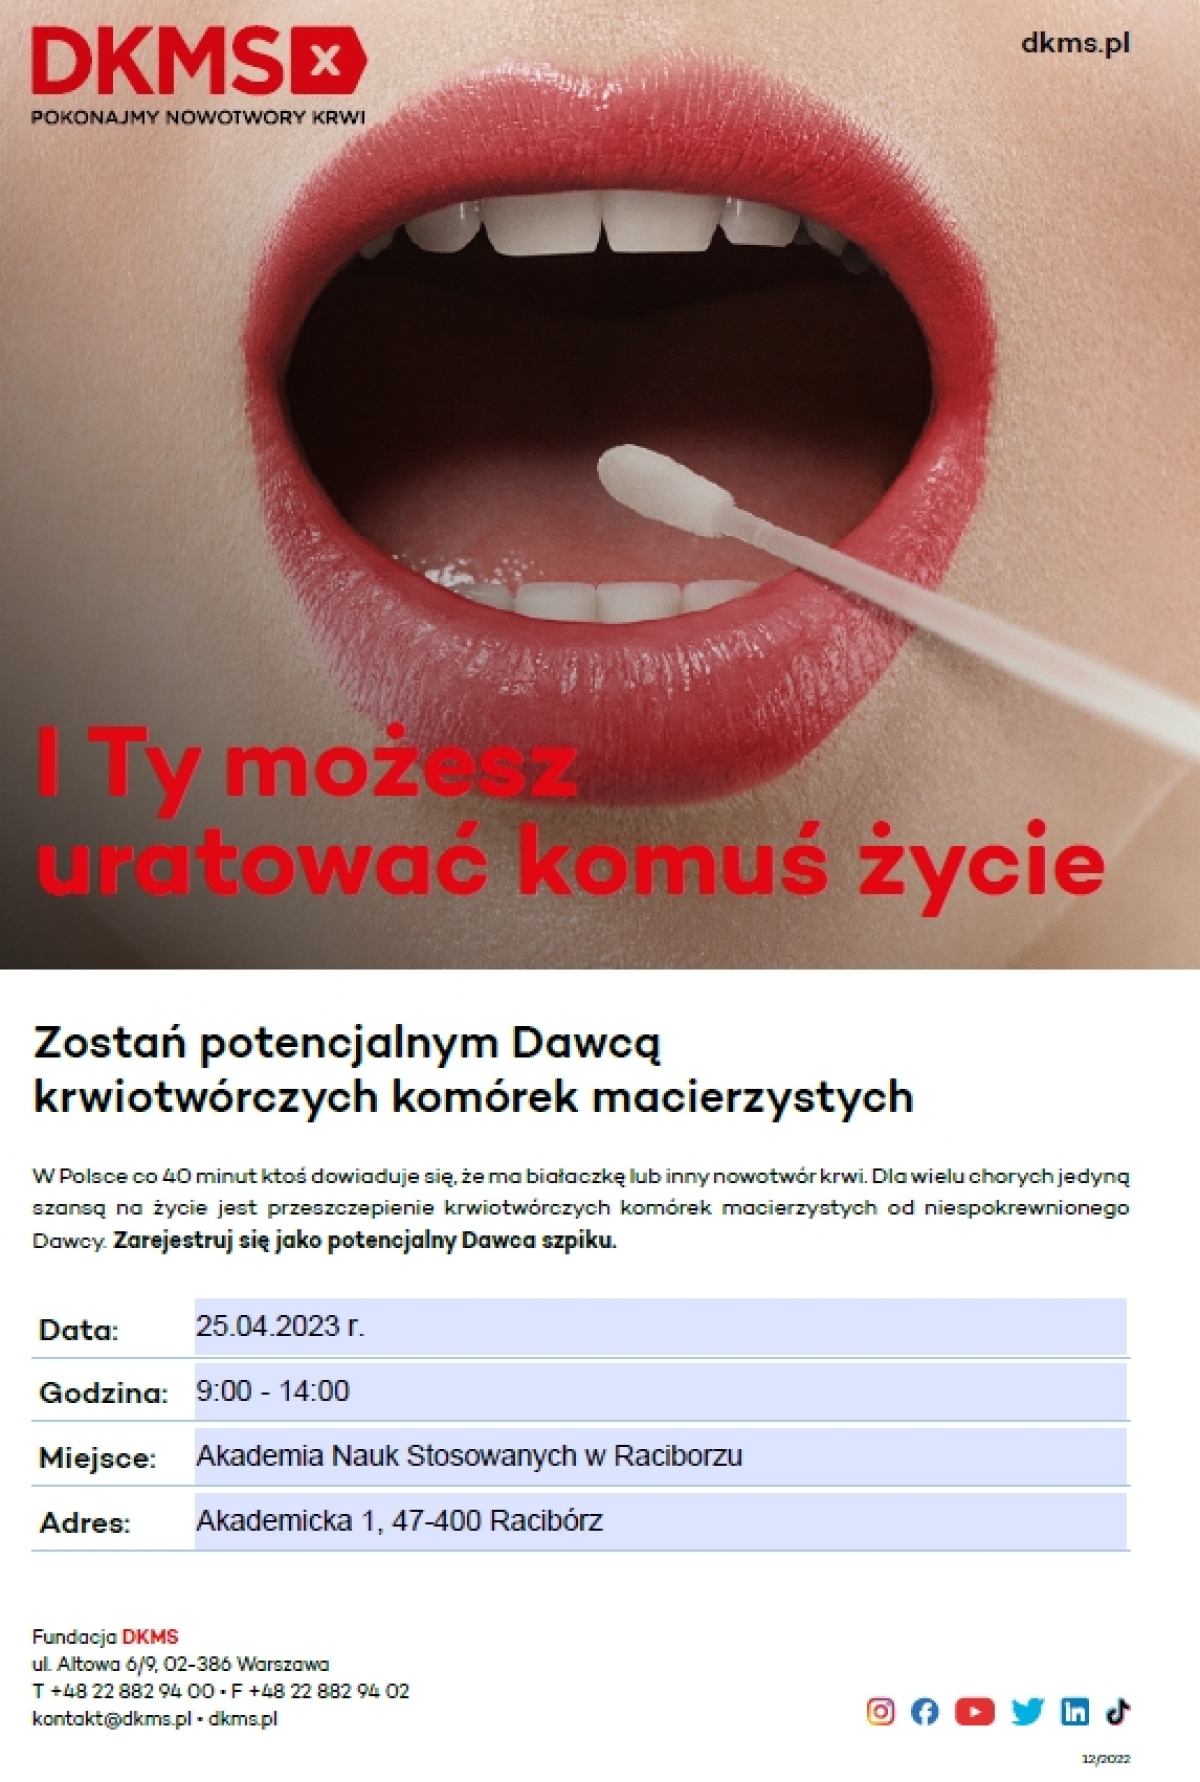 dkms18042023